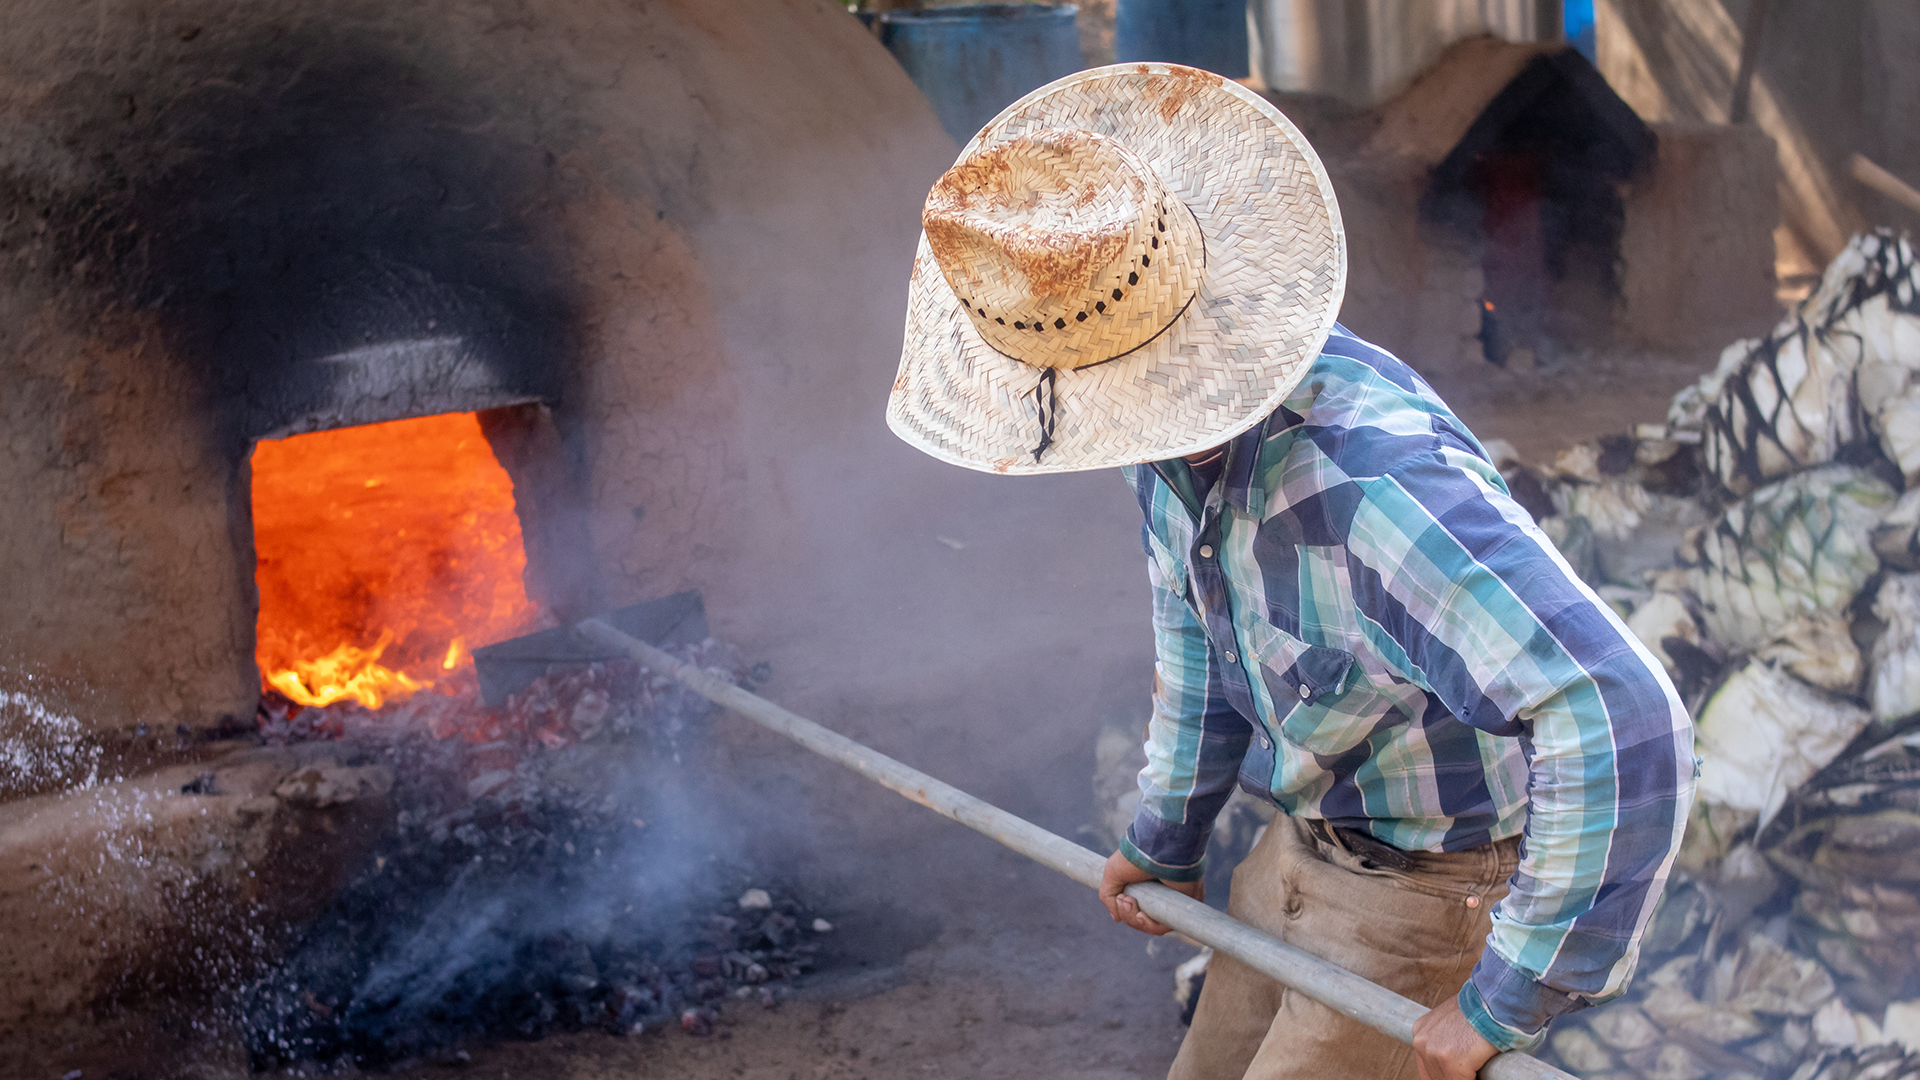 A person working with an adobe oven.